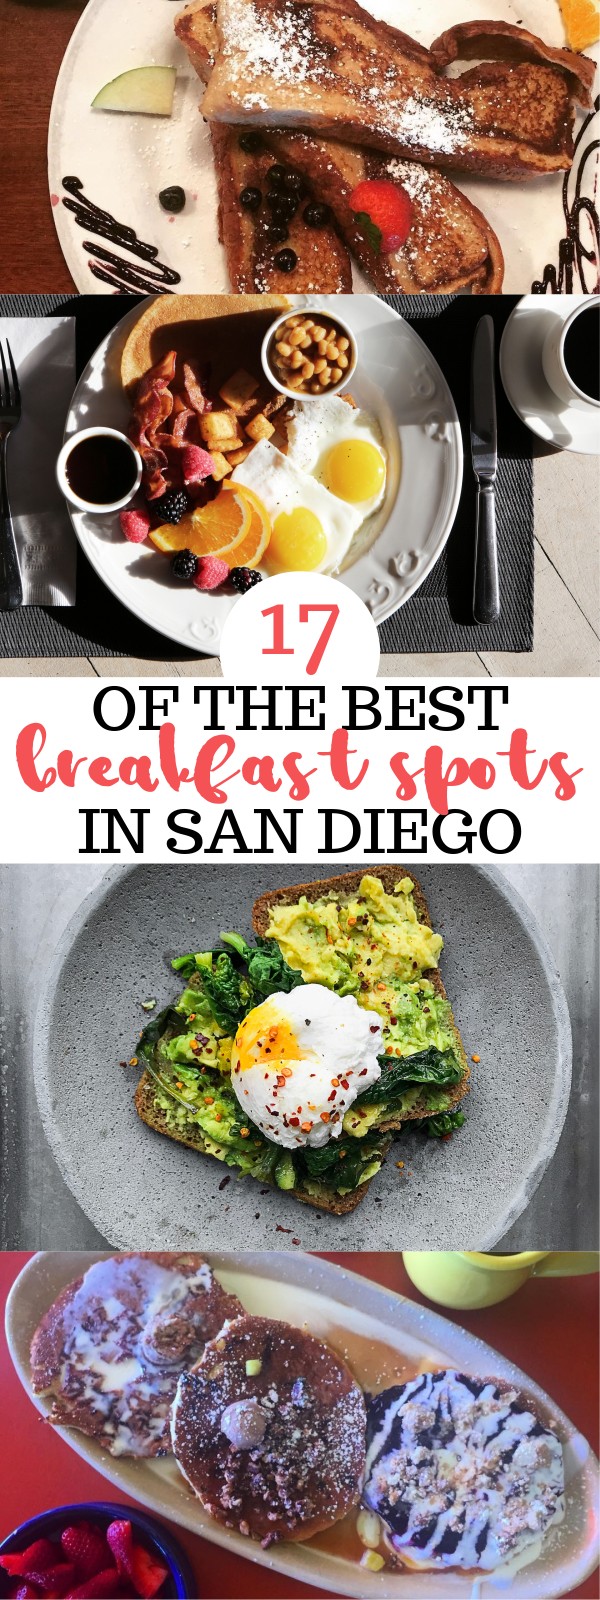 17 Of The Best Breakfast Spots In San Diego - Gems You Have To Try!